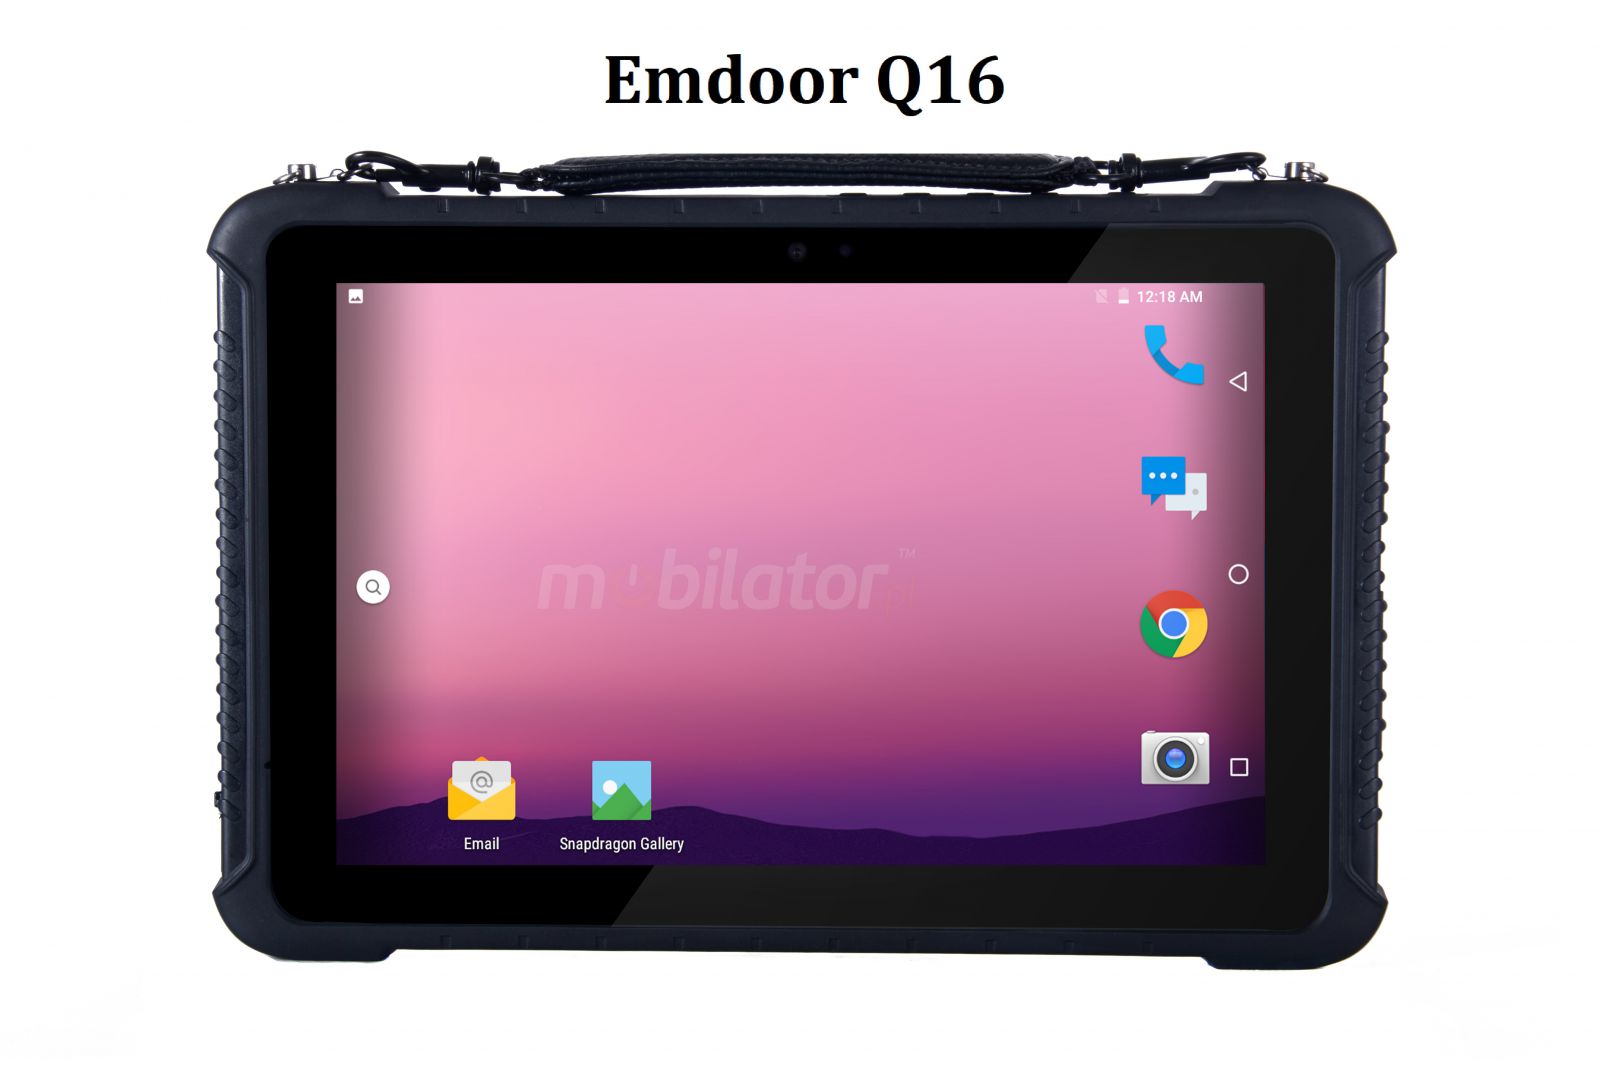 Emdoor Q16 v.3 - resistant (IP65) 10-inch tablet with 4GB RAM, 64GB hard drive, NFC and a 2D TTL code scanner 